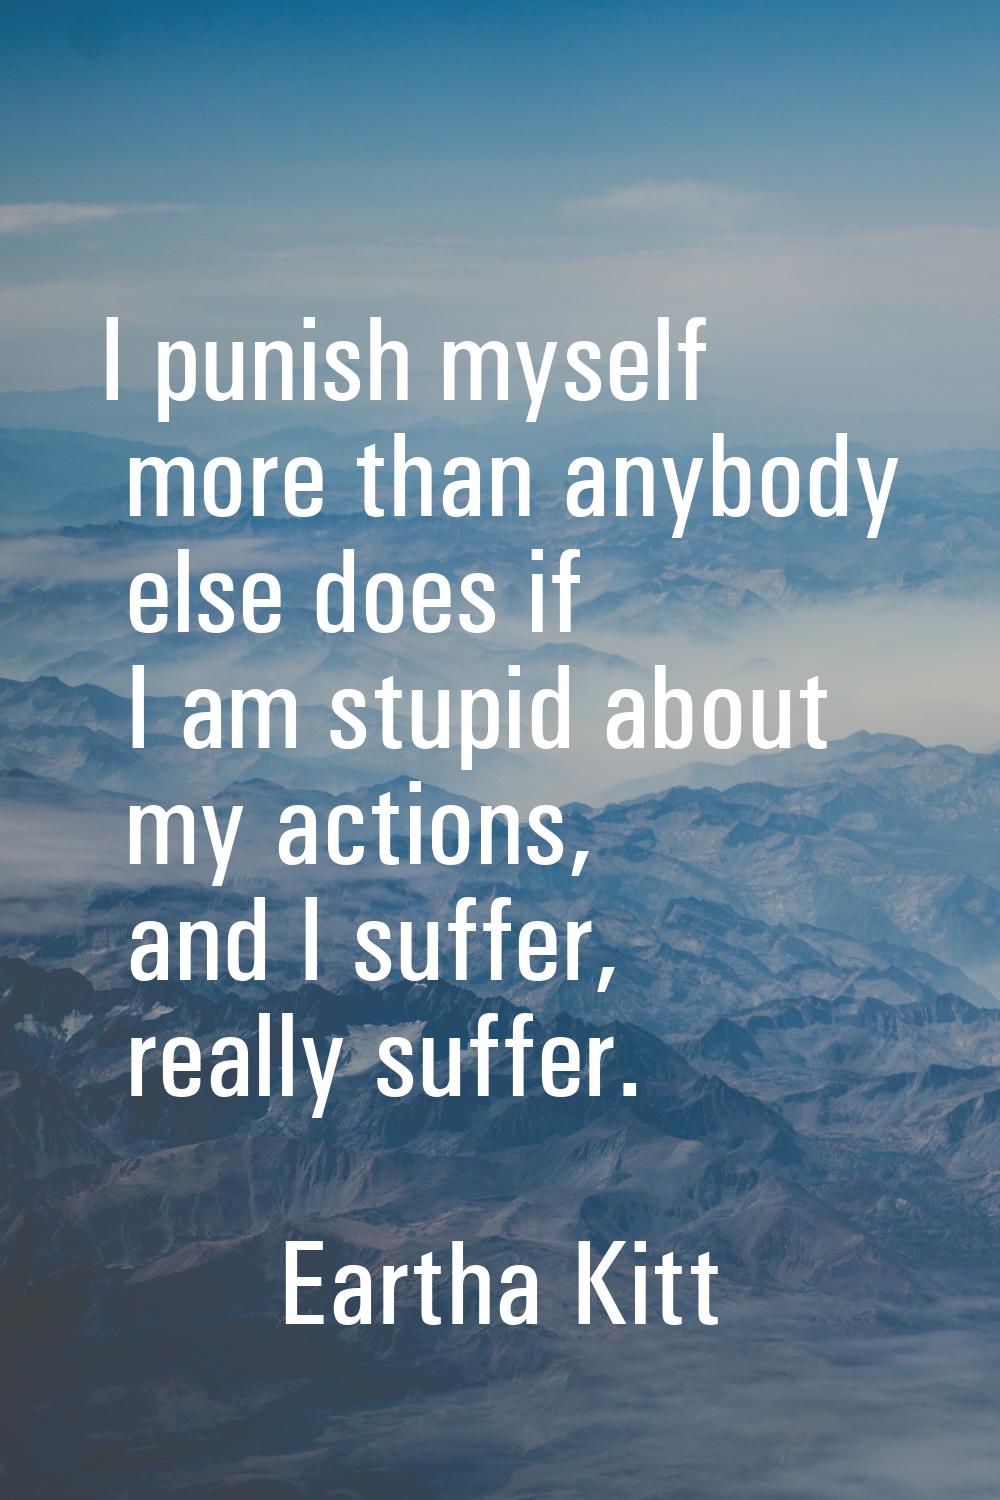 I punish myself more than anybody else does if I am stupid about my actions, and I suffer, really s